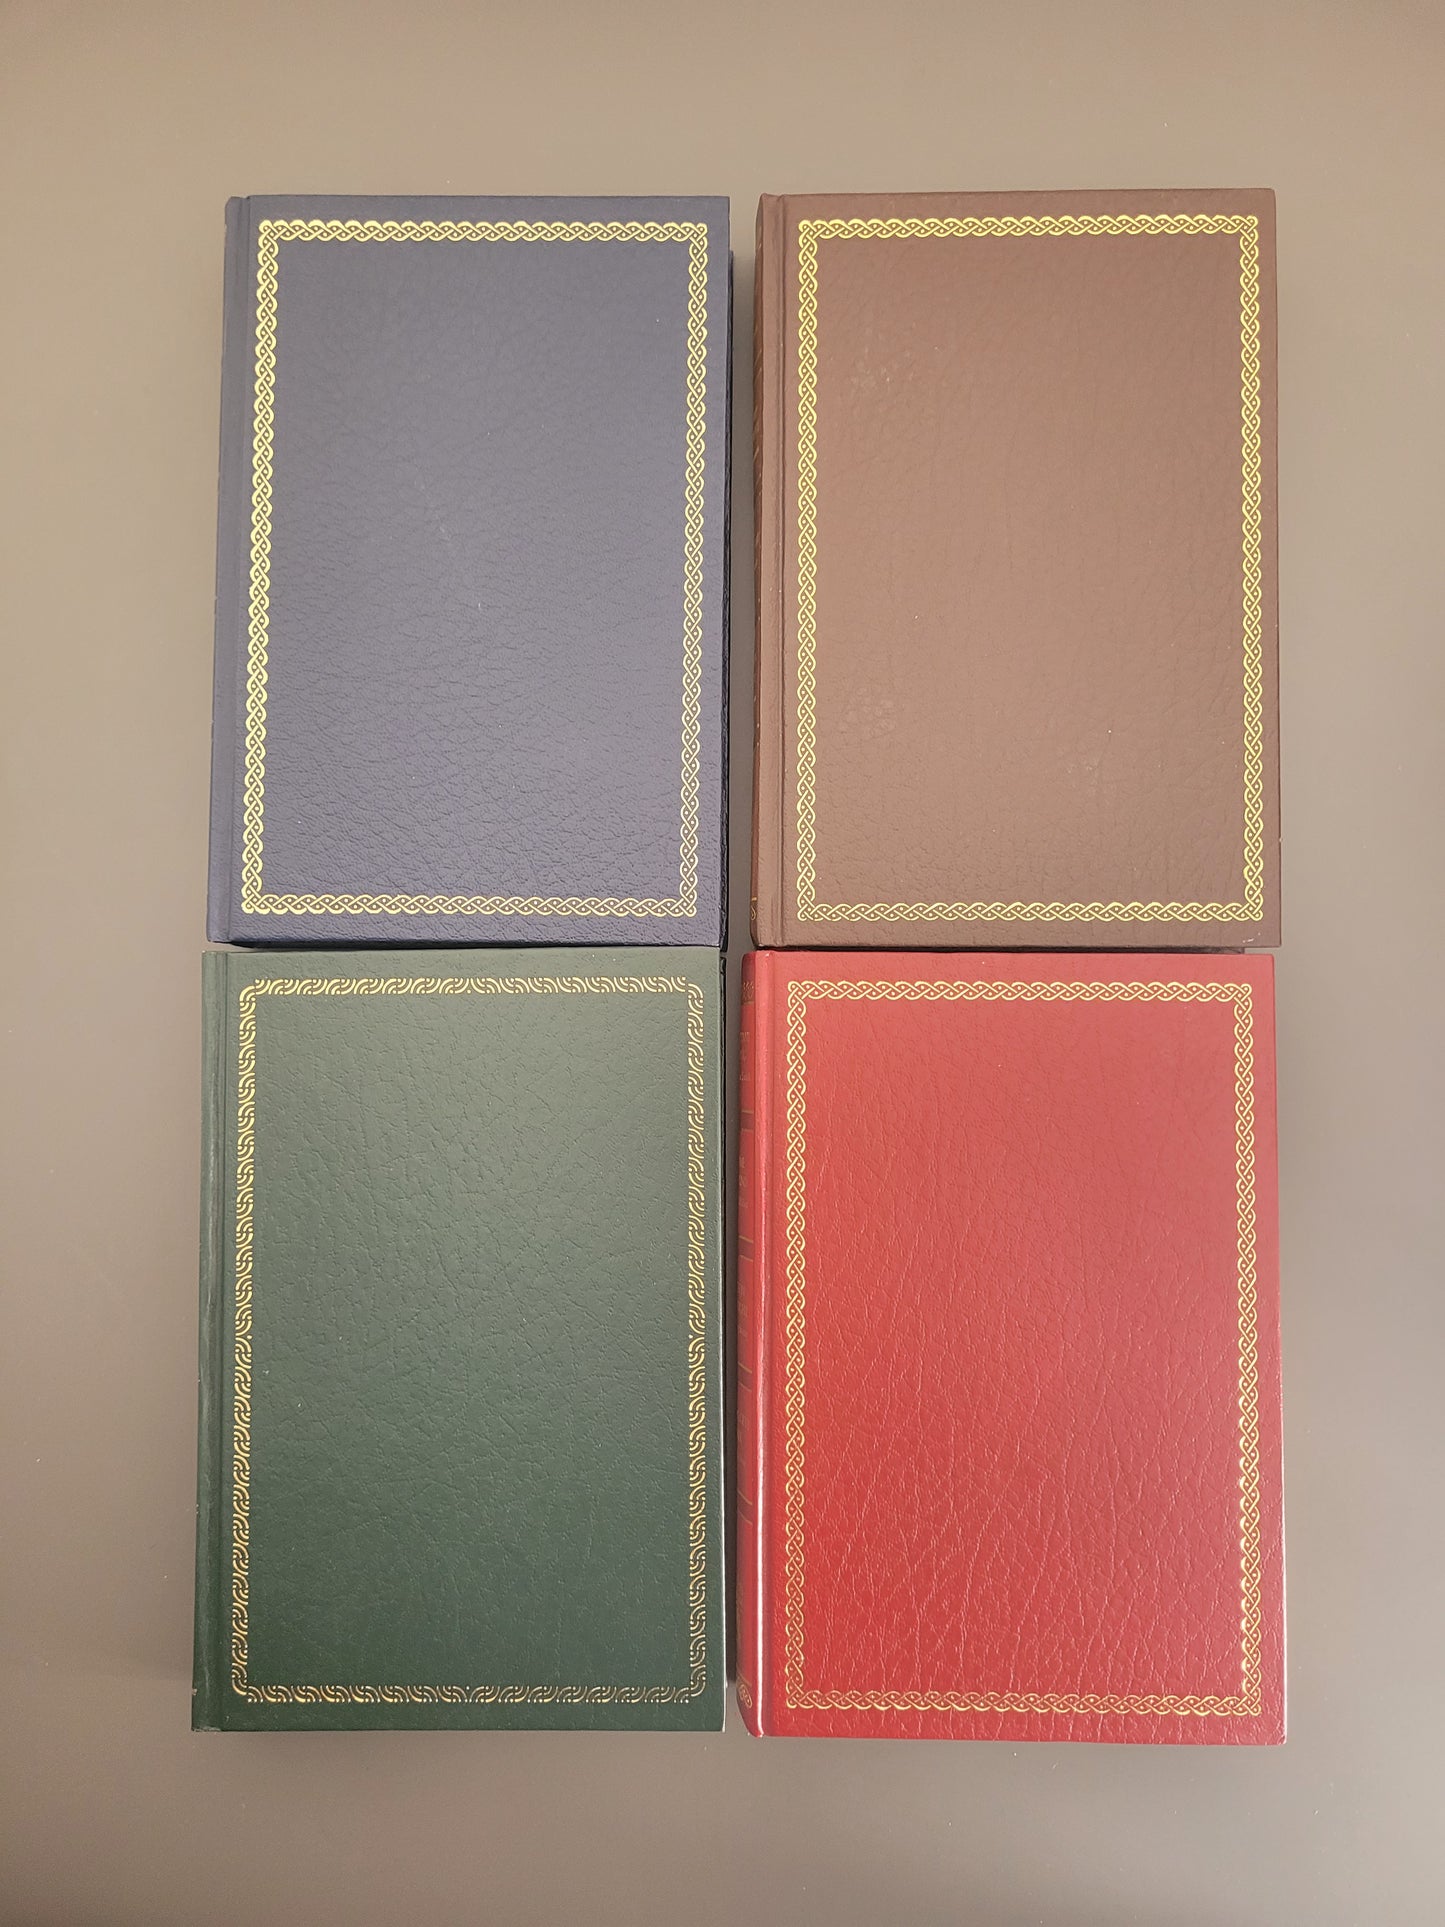 A picture of 4 hardbacks - one blue, one brown, one green and one red.